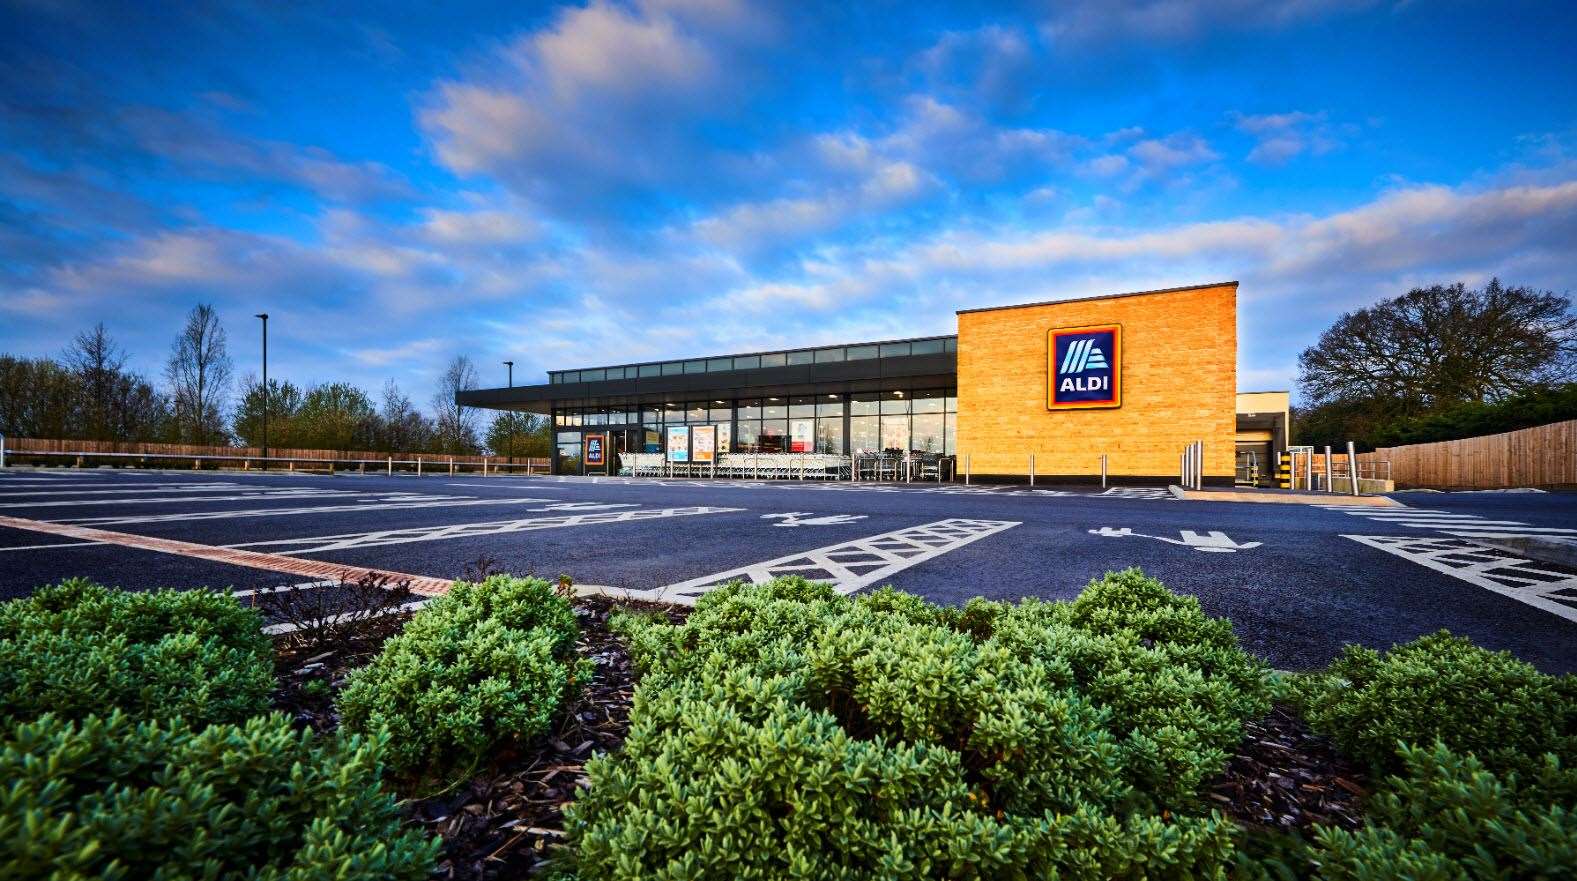 Aldi has been growing rapidly - with a string of new stores opening across the county over the last 12 months - and more to come